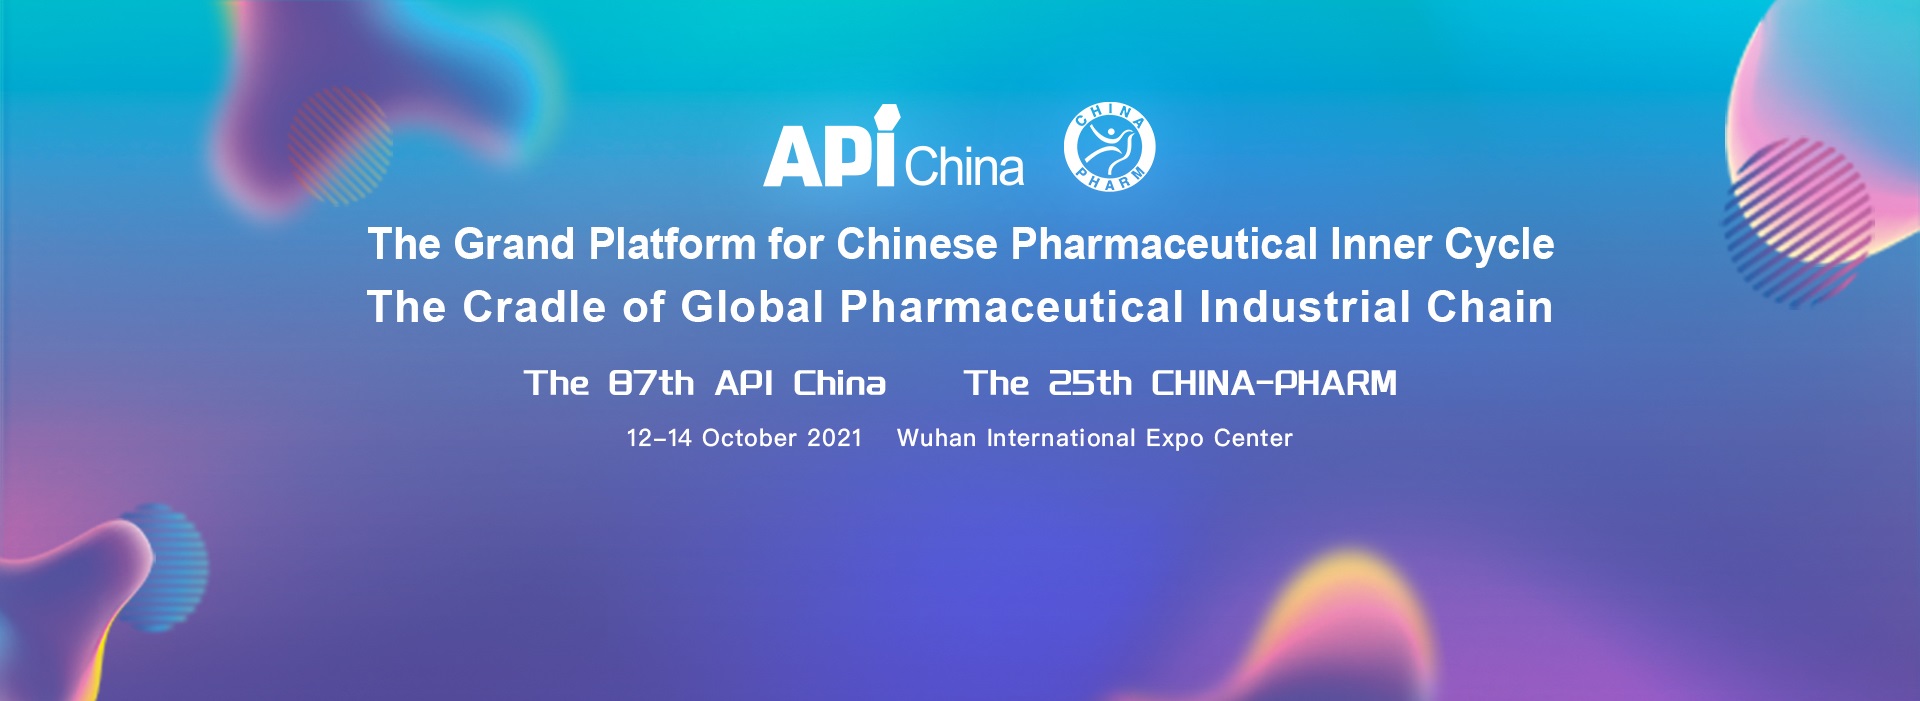 The 87th API China: 12-14 Oct 2021 (Wuhan)